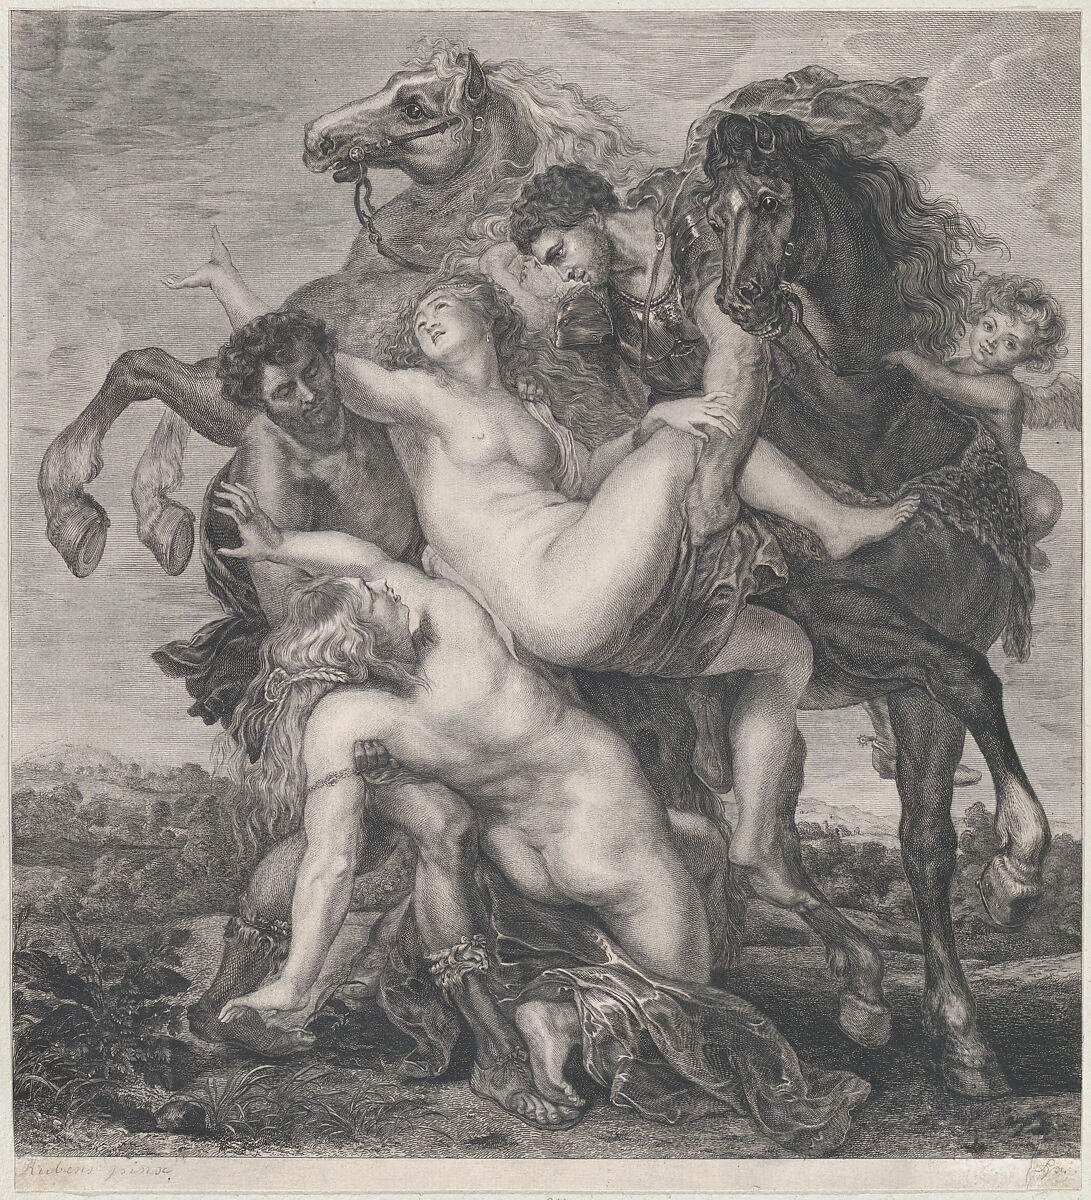 Phoebe and Hilaeria, the daughters of Leucippus, being abducted by Castor and Pollux, Anonymous, Engraving 